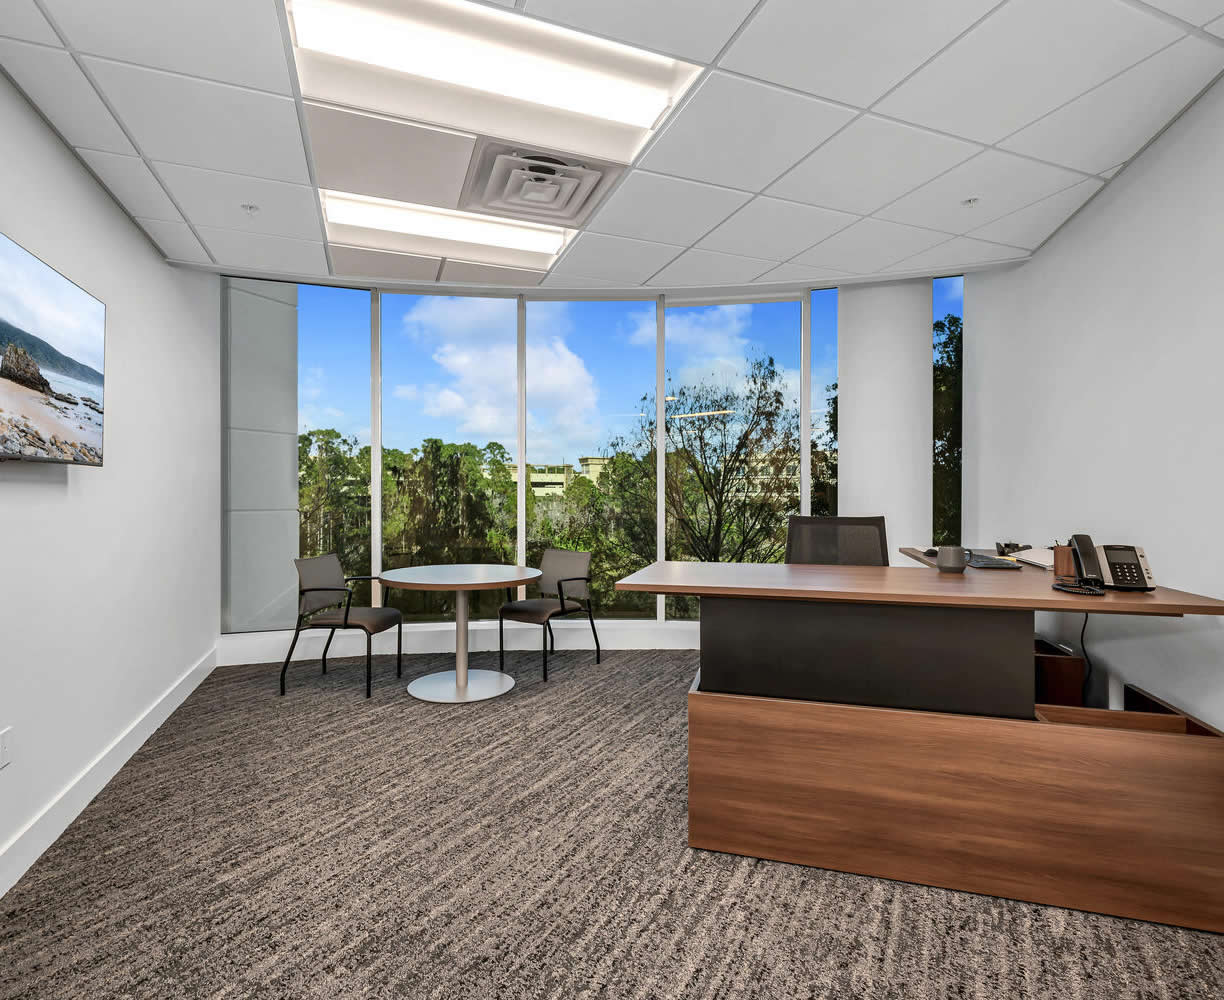 Is Your Business New to SW Florida? Need Office Space? – Let Us Help!